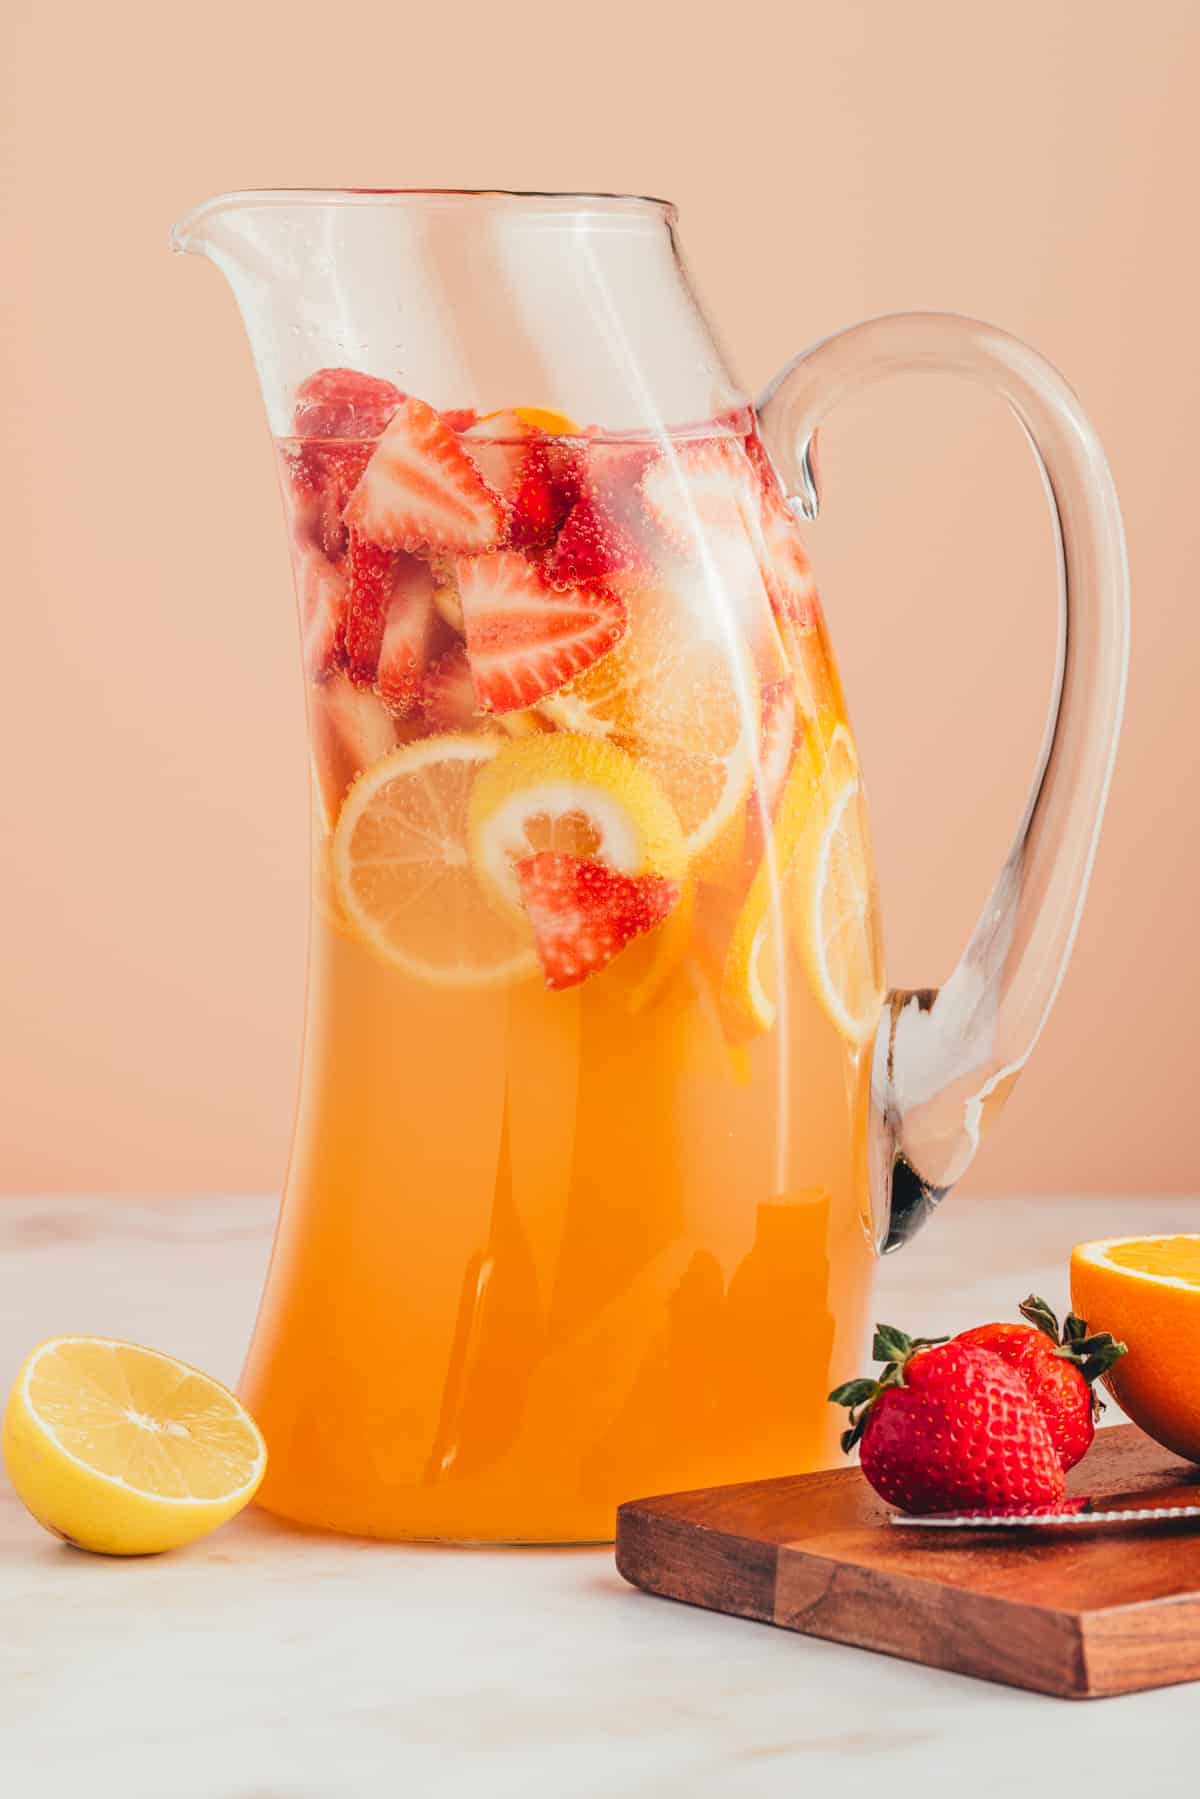 Pitcher full of non alcoholic sangria with sliced fruit inside.